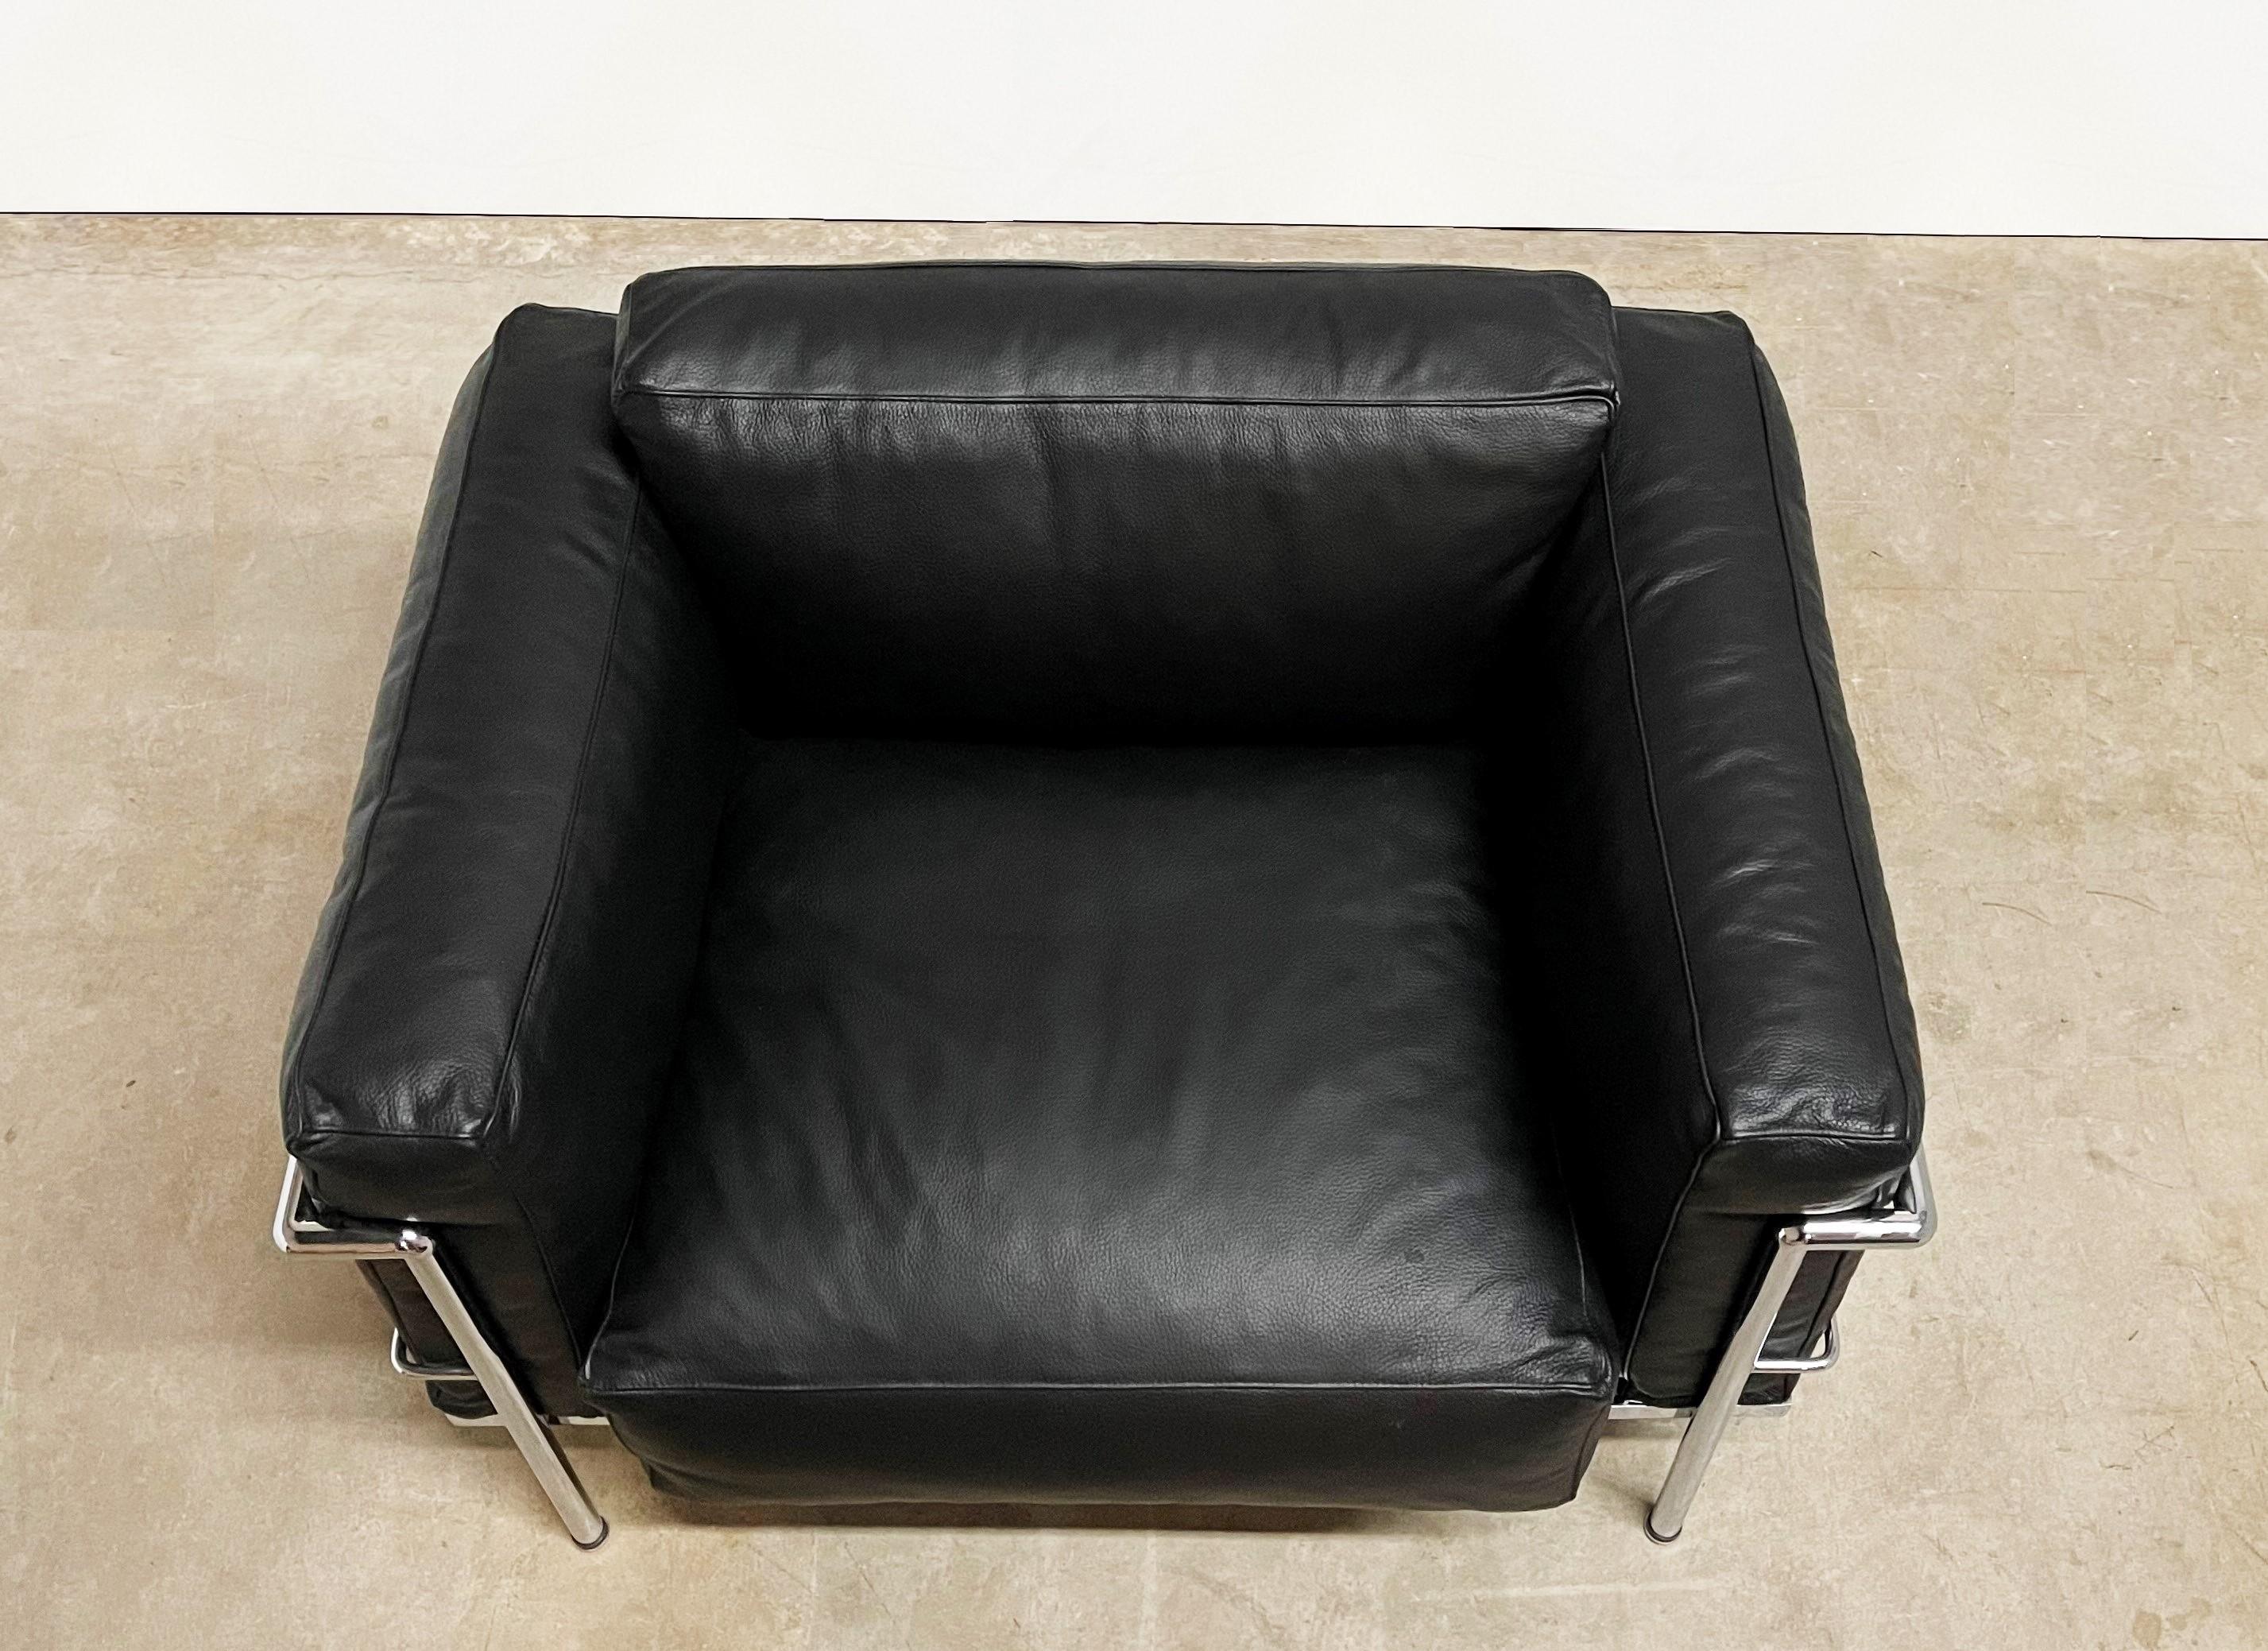 Pierre Jeanneret, Charlotte Perriand & Le Corbusier Grand Comfort Loungesessel im Zustand „Gut“ im Angebot in Dallas, TX